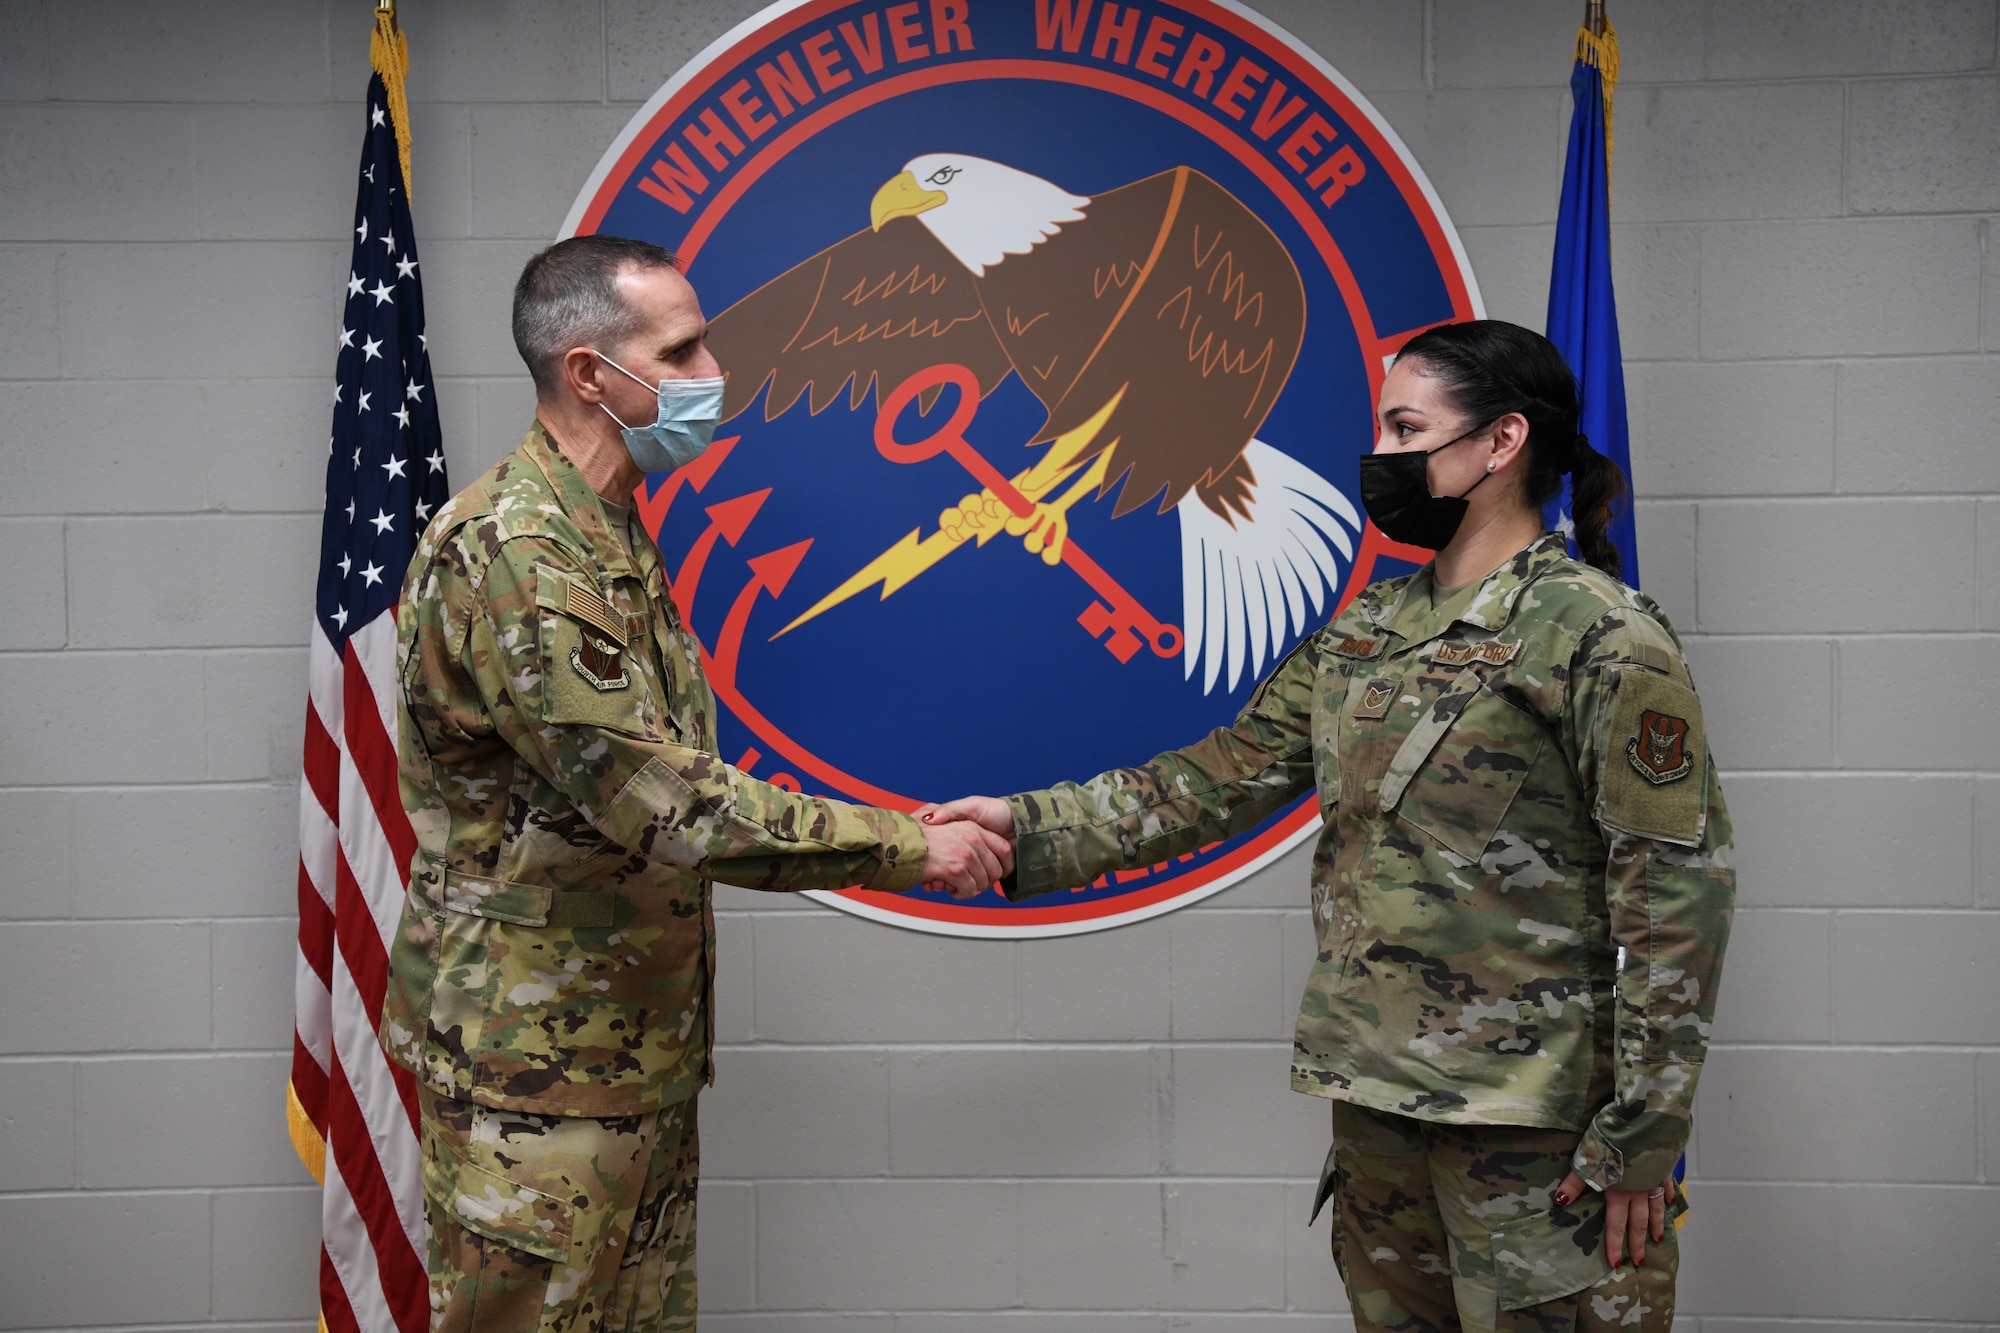 Maj. Gen. Jeffrey T. Pennington, 4th Air Force commander, presents a coin to Tech. Sgt. Roselys Baugh, 445th Force Support Squadron force management NCO in charge, Nov. 6, 2021.The general visited with Airmen across the various squadrons and watched various training events both days. He recognized five Reserve Citizen Airmen selected by the units as being outstanding performers.